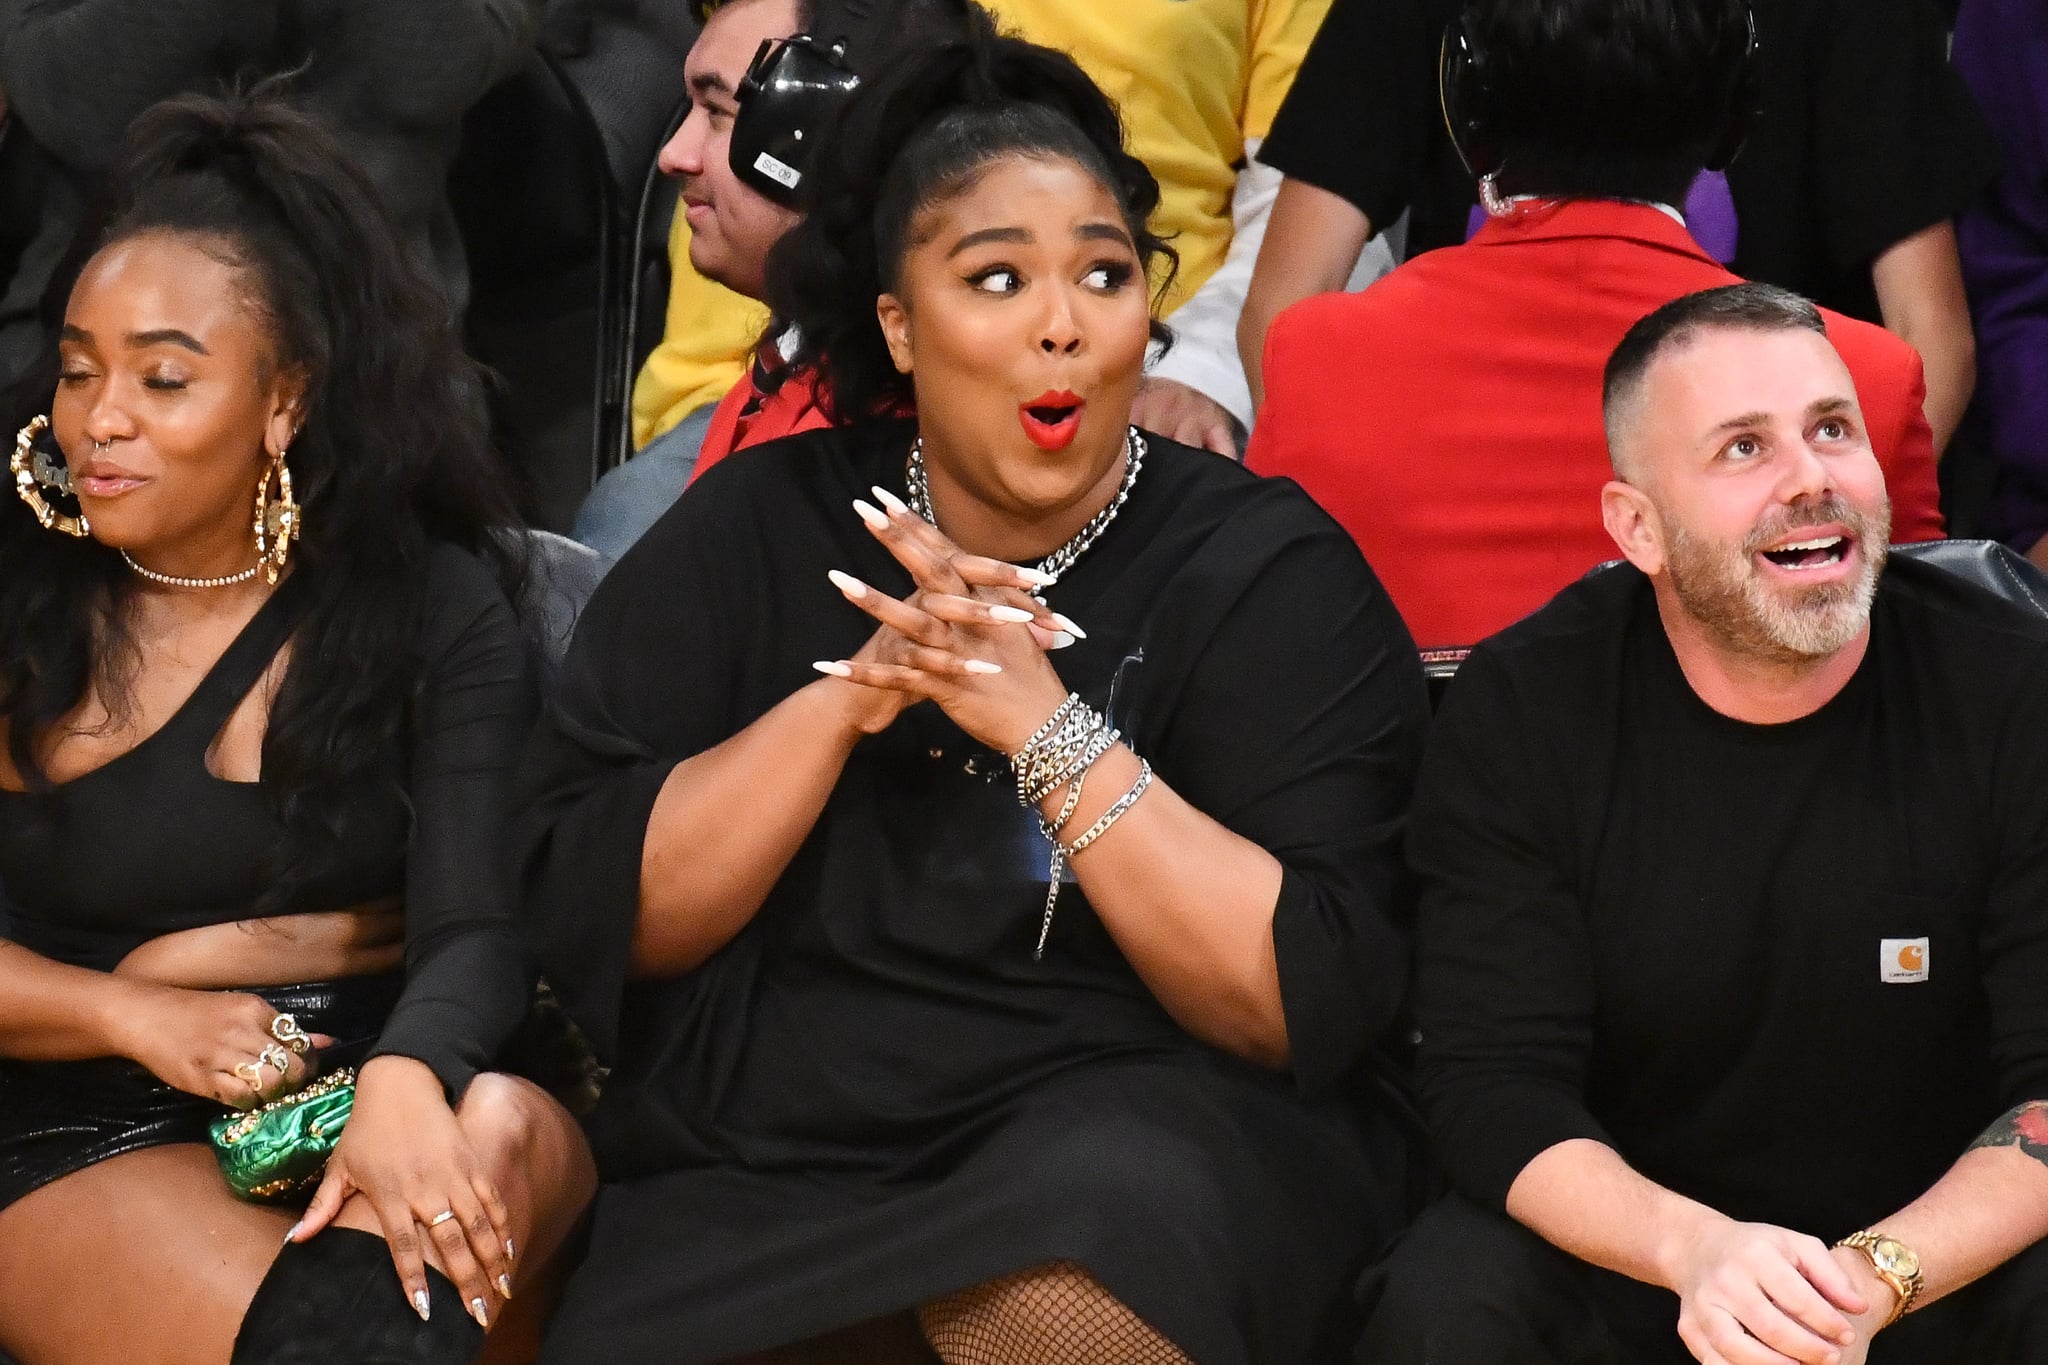 LOS ANGELES, CALIFORNIA - DECEMBER 08: Singer Lizzo (C) attends a basketball game between the Los Angeles Lakers and the Minnesota Timberwolves at Staples Center on December 08, 2019 in Los Angeles, California. (Photo by Allen Berezovsky/Getty Images)